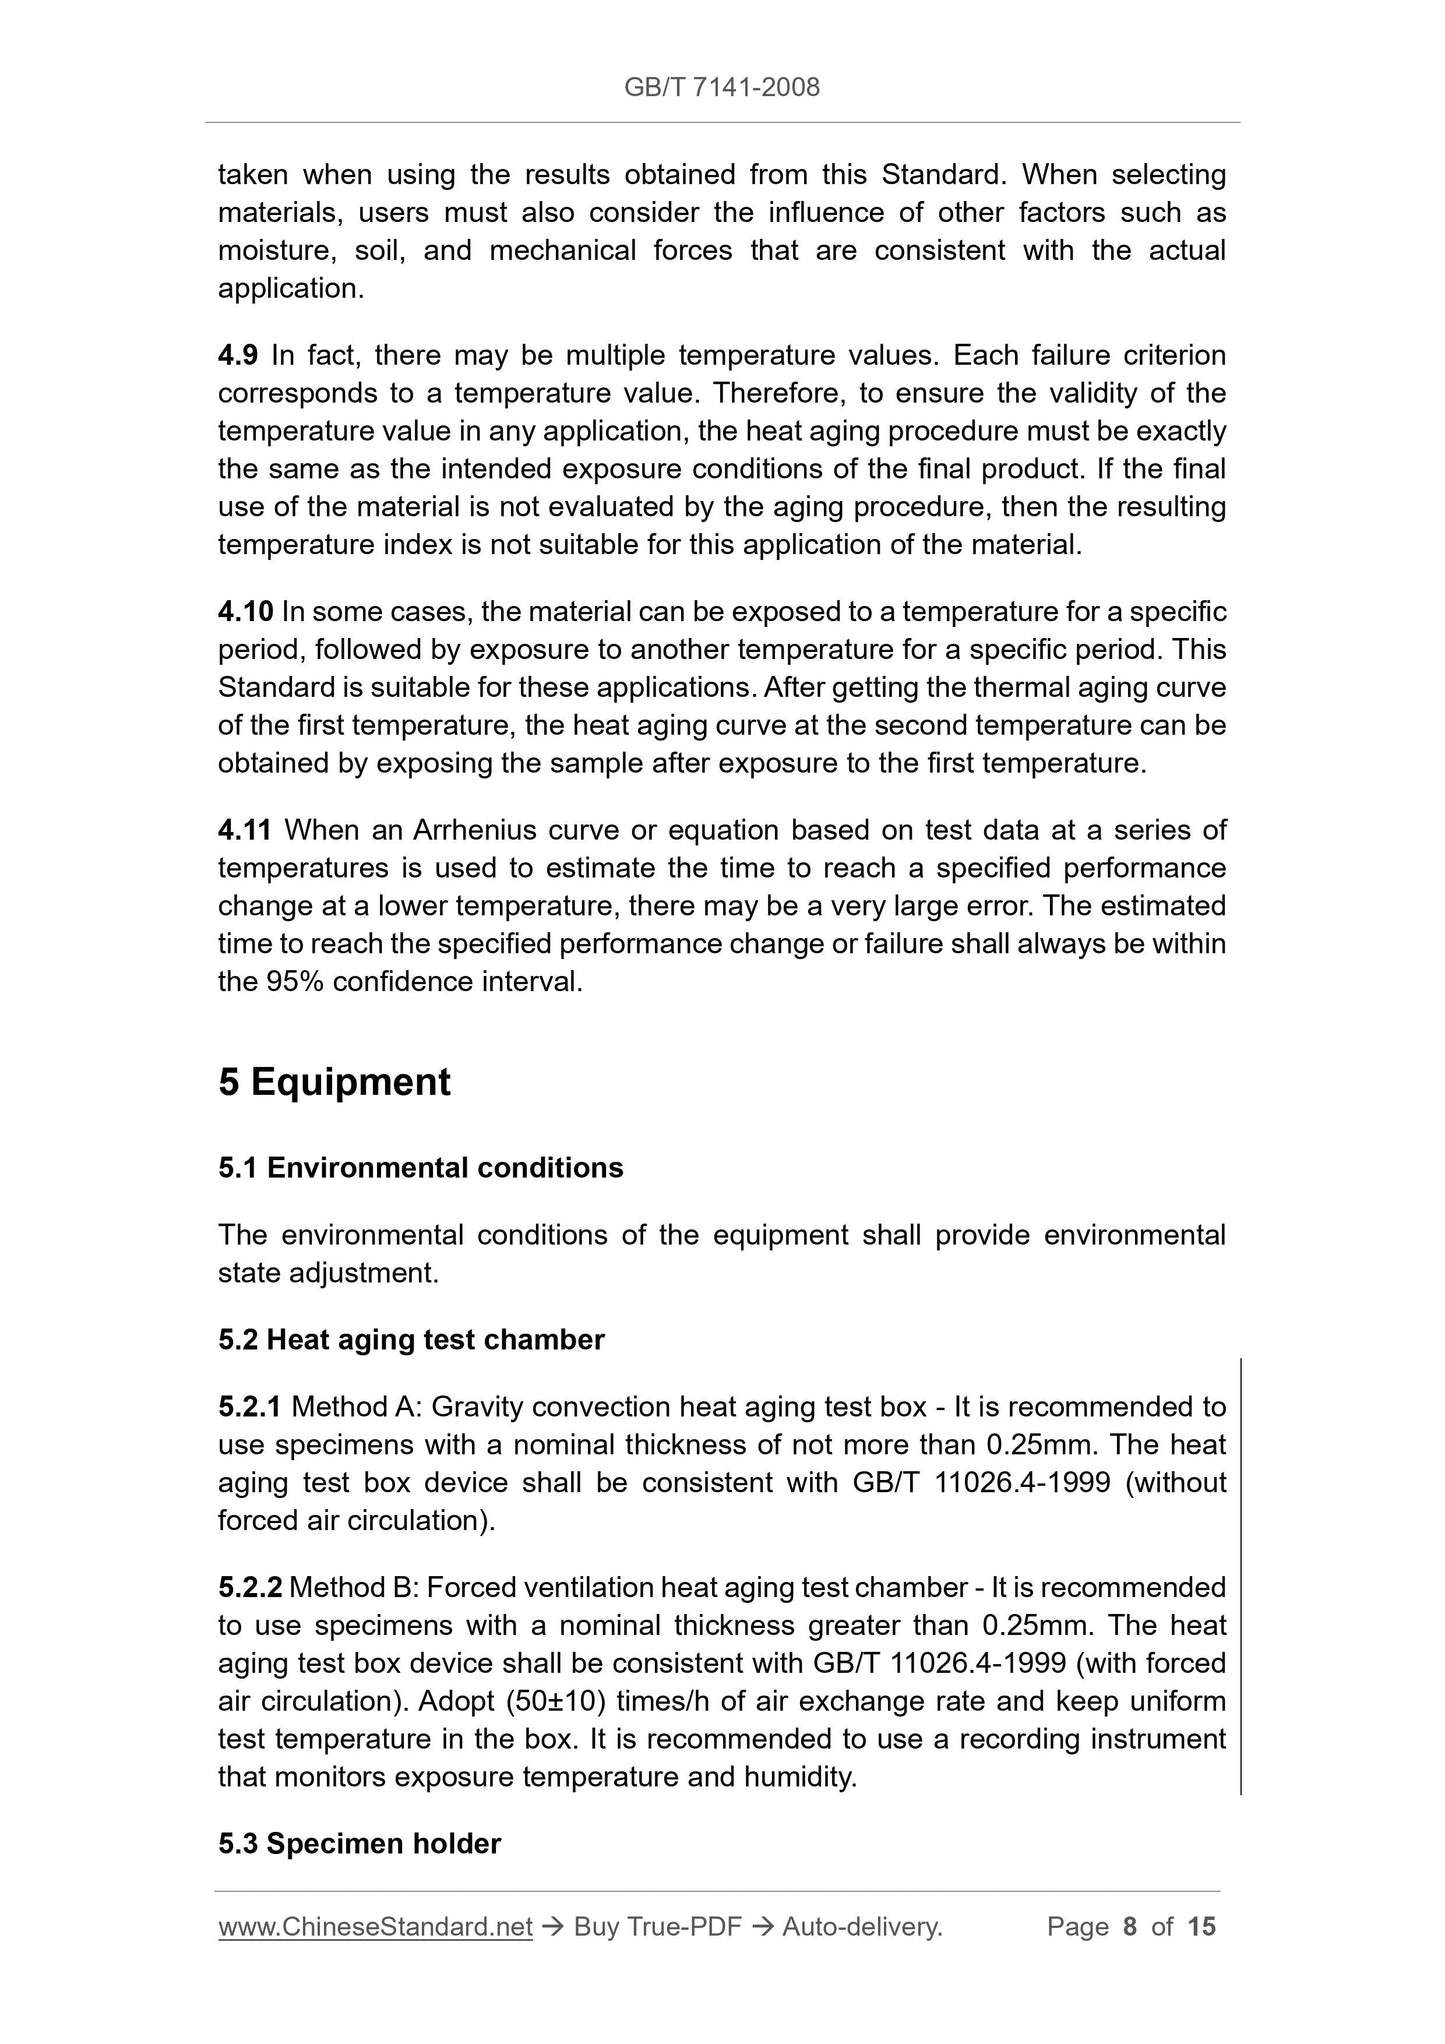 GB/T 7141-2008 Page 5